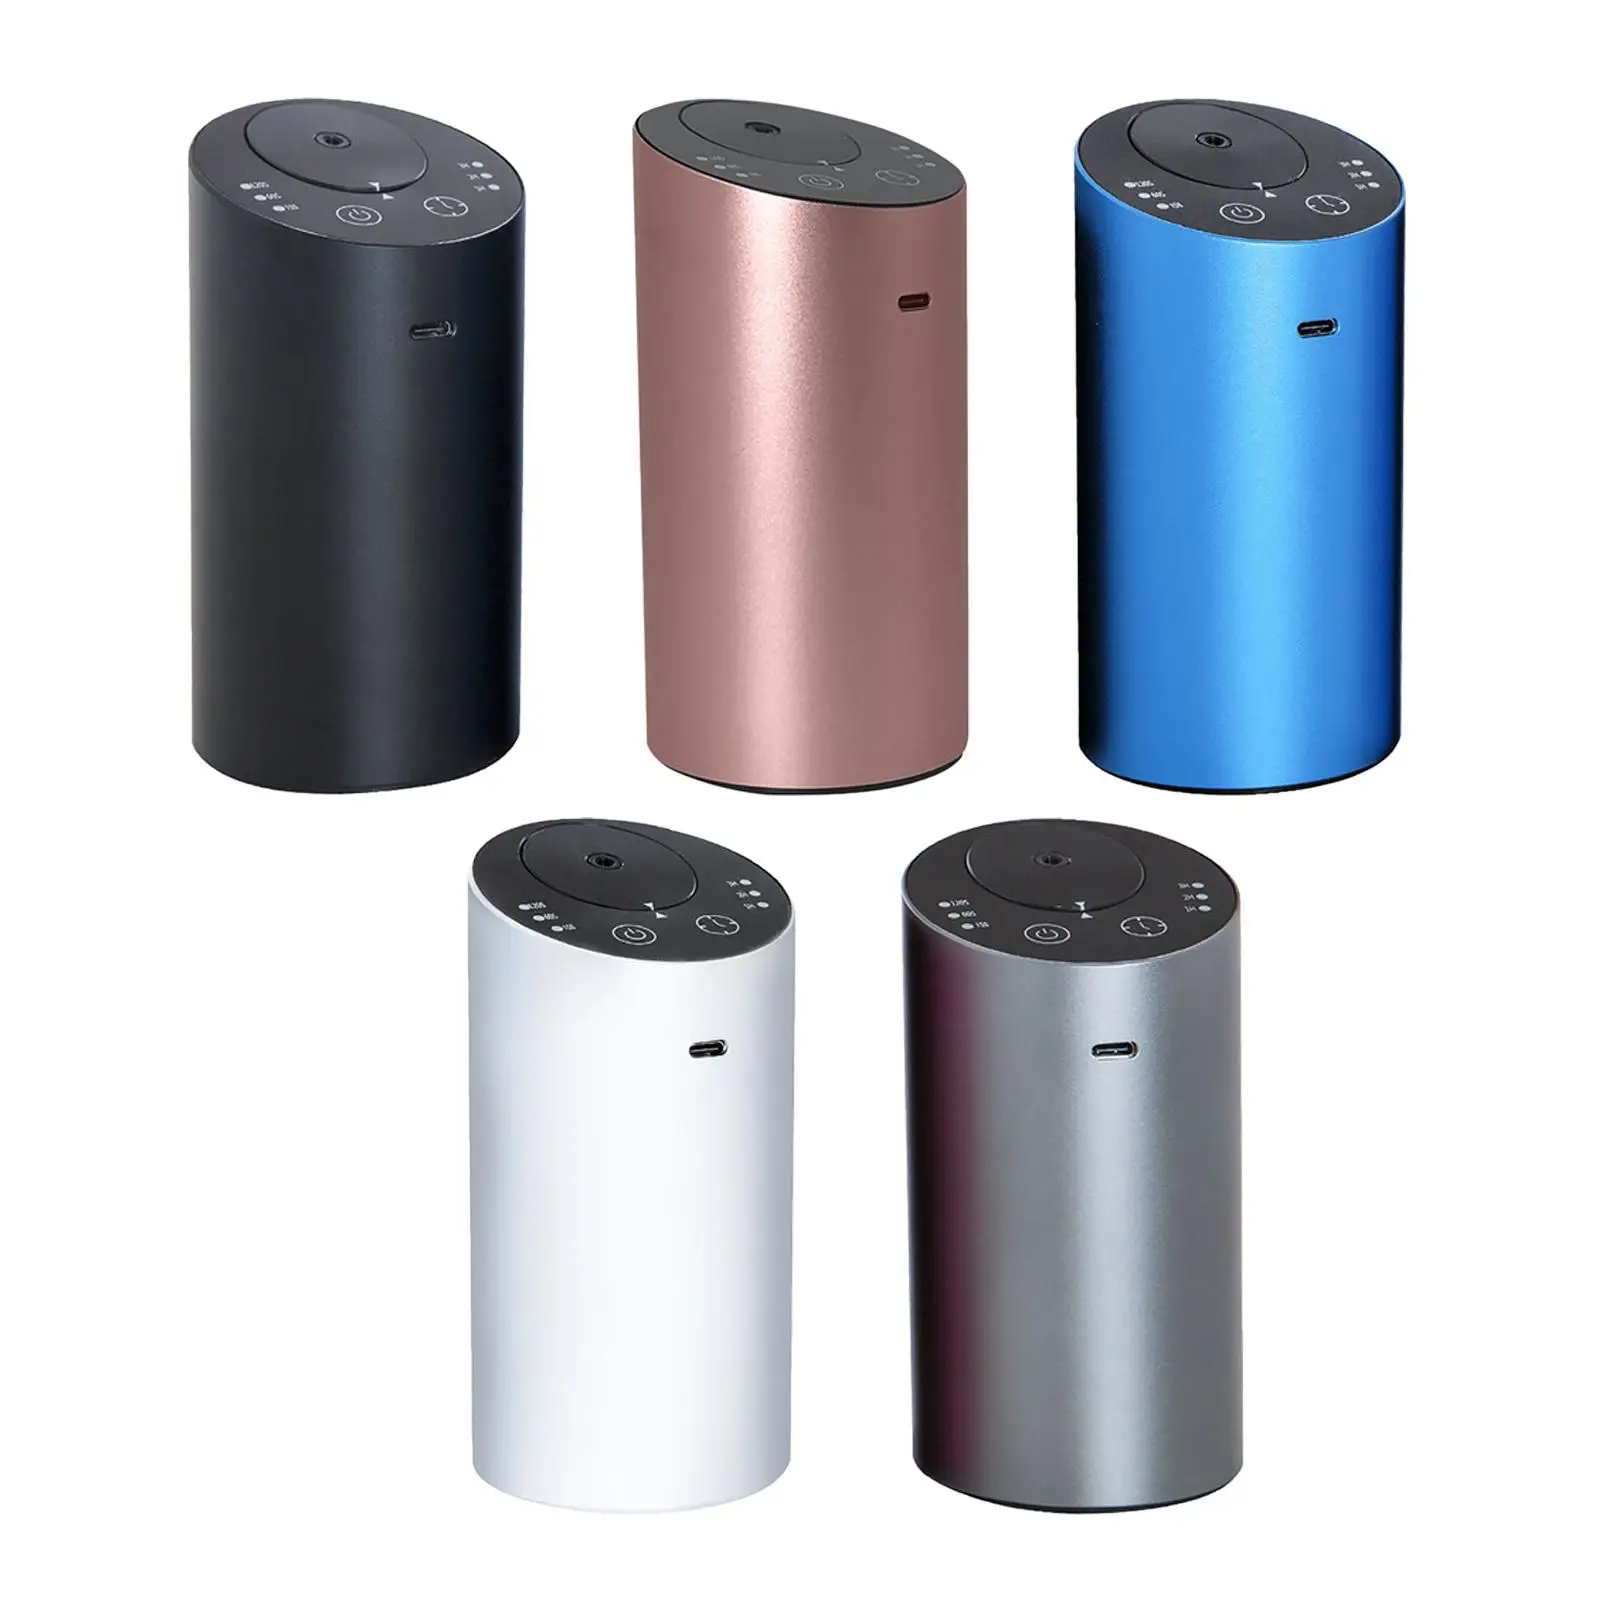 Auto Ultrasonic Aroma Diffuser for Car Office Essential Oil Diffuser Air Humidifier Home Aromatherapy USB Nano Cool Mist Maker